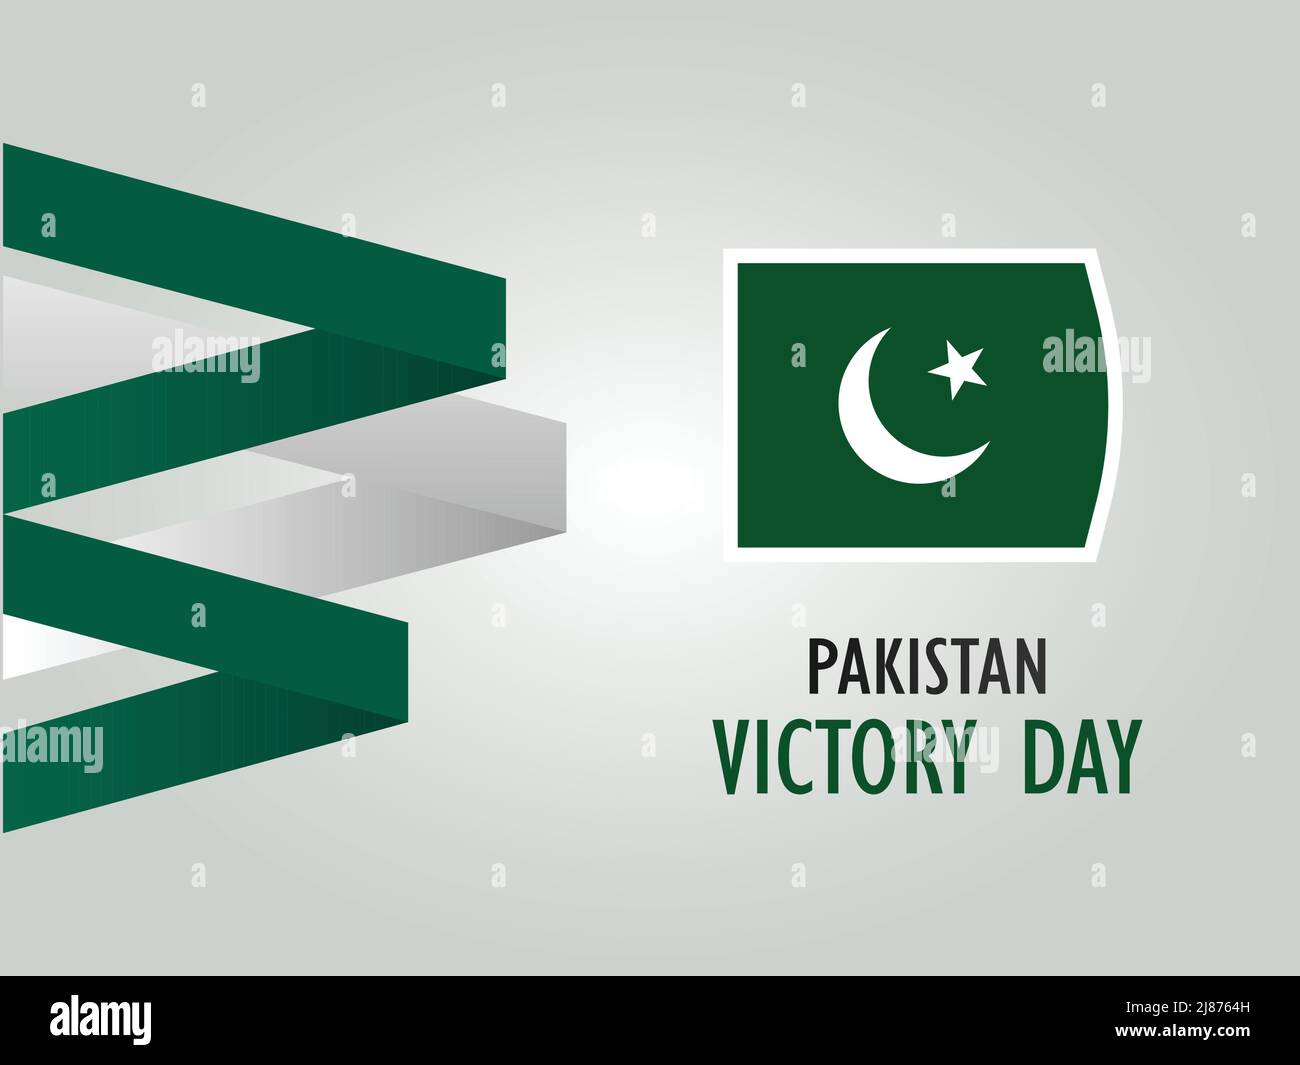 Pakistan victory day celebration background with ribbon design Stock Vector